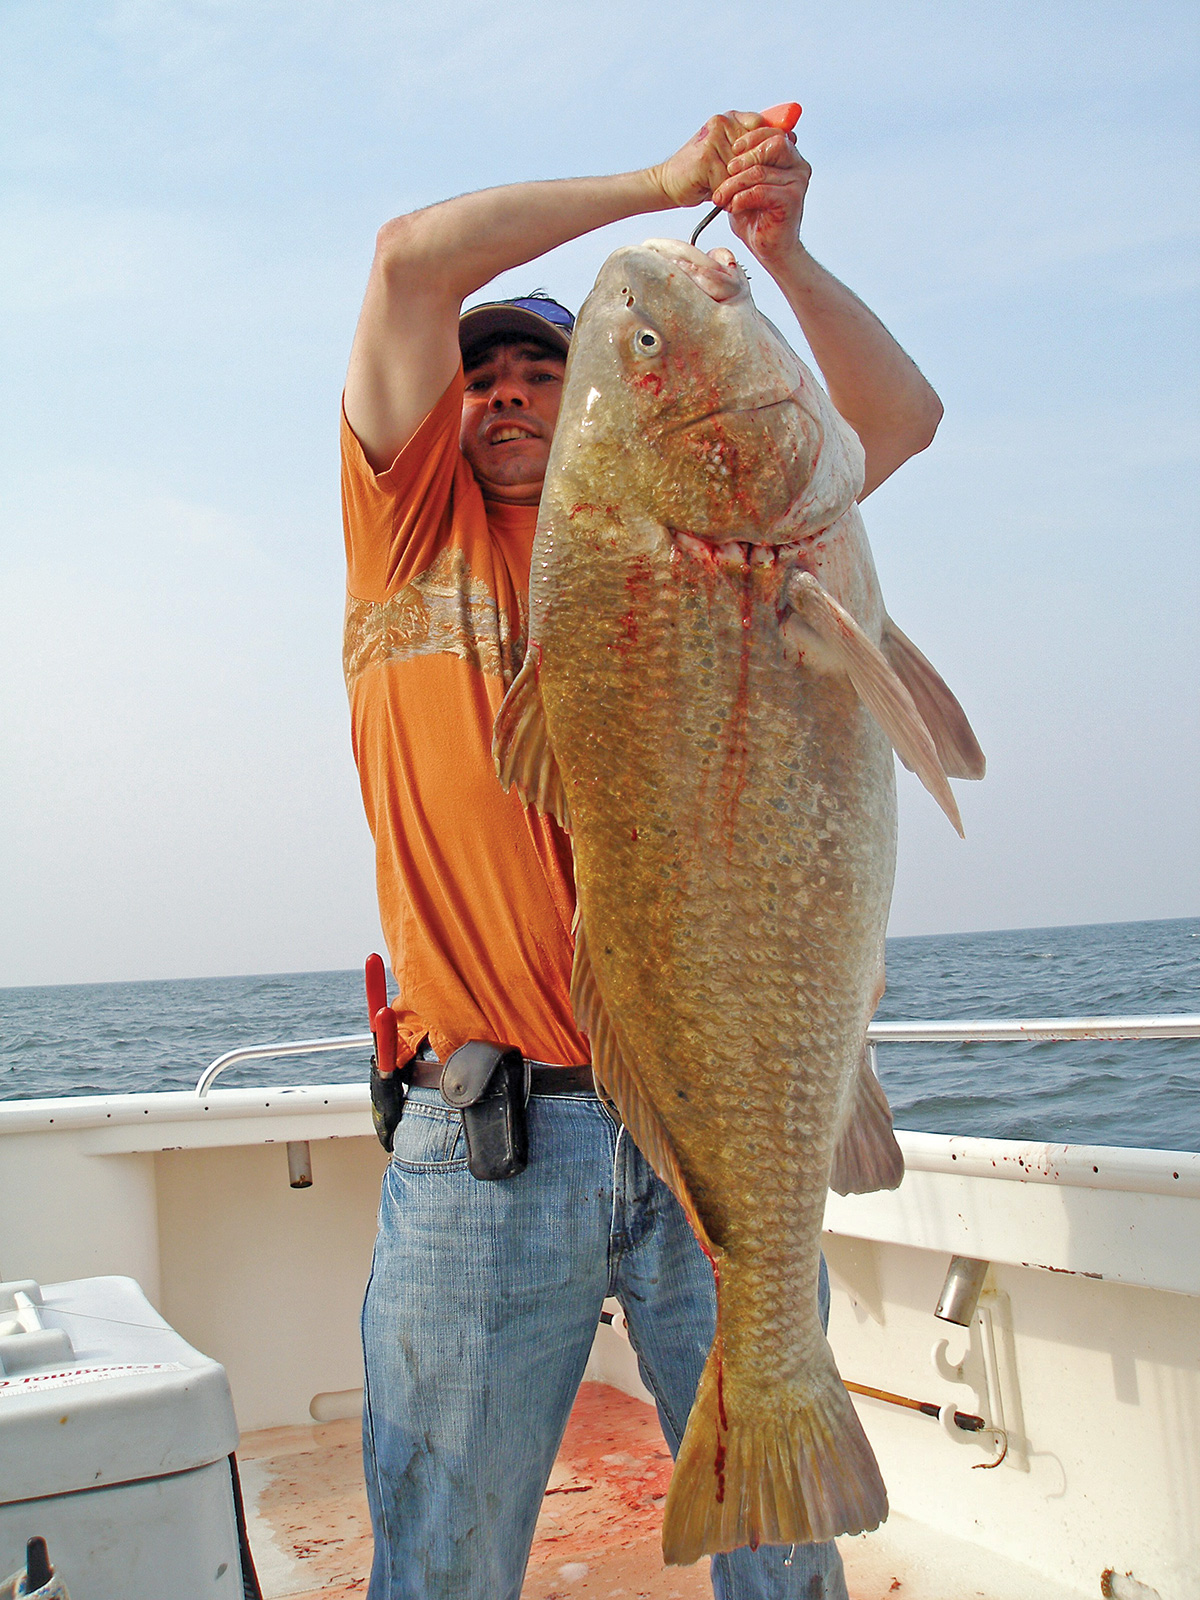 Black Drum: From Delaware to Great Bay - The Fisherman